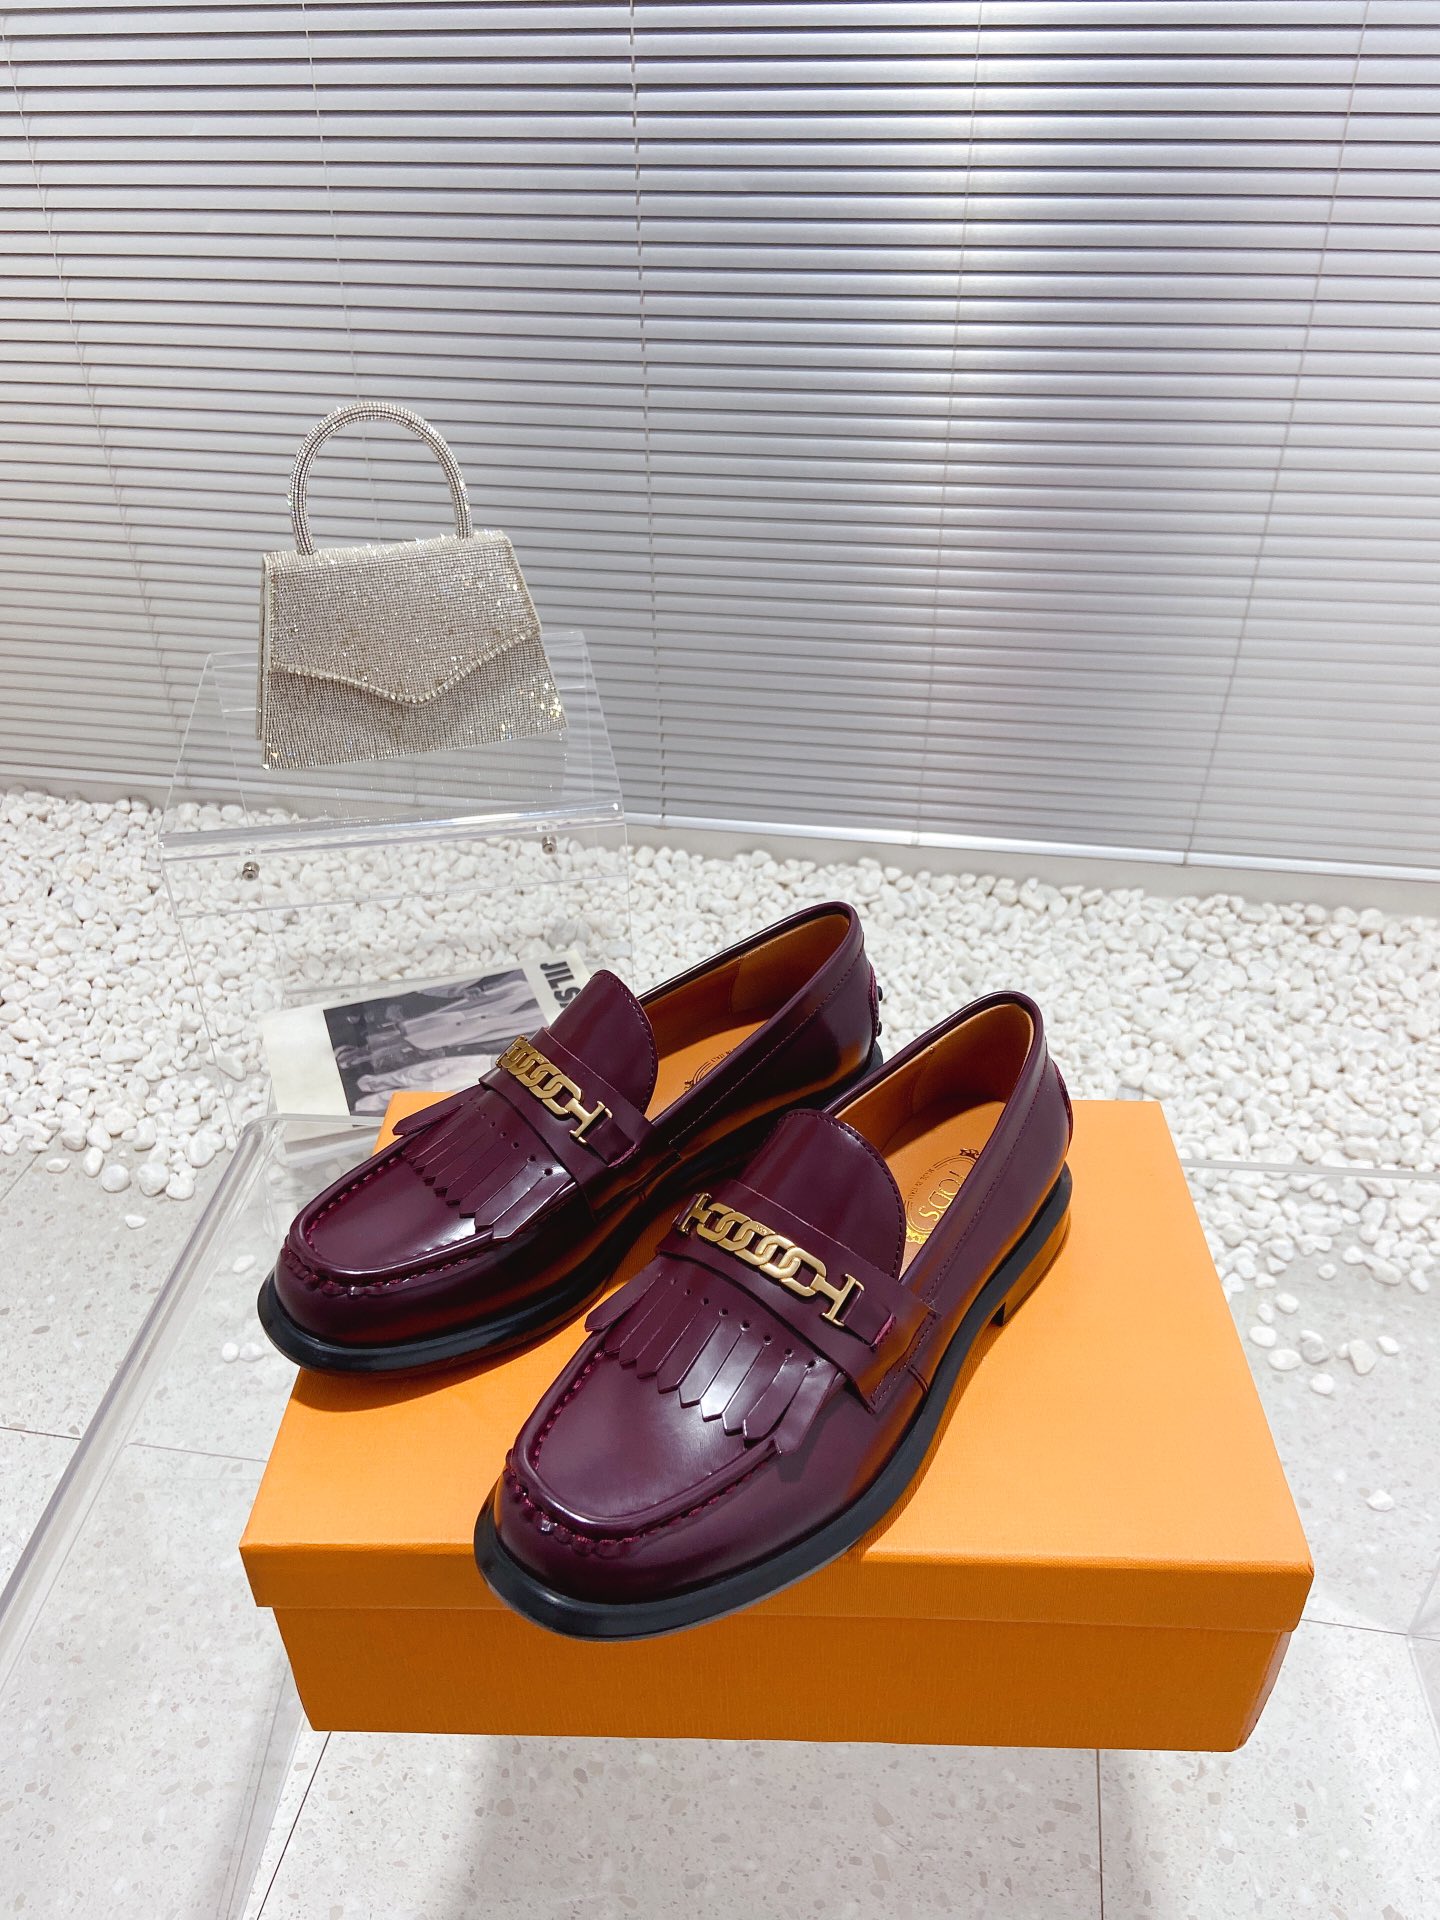 TODS latest metal buckle British retro tassel loafers